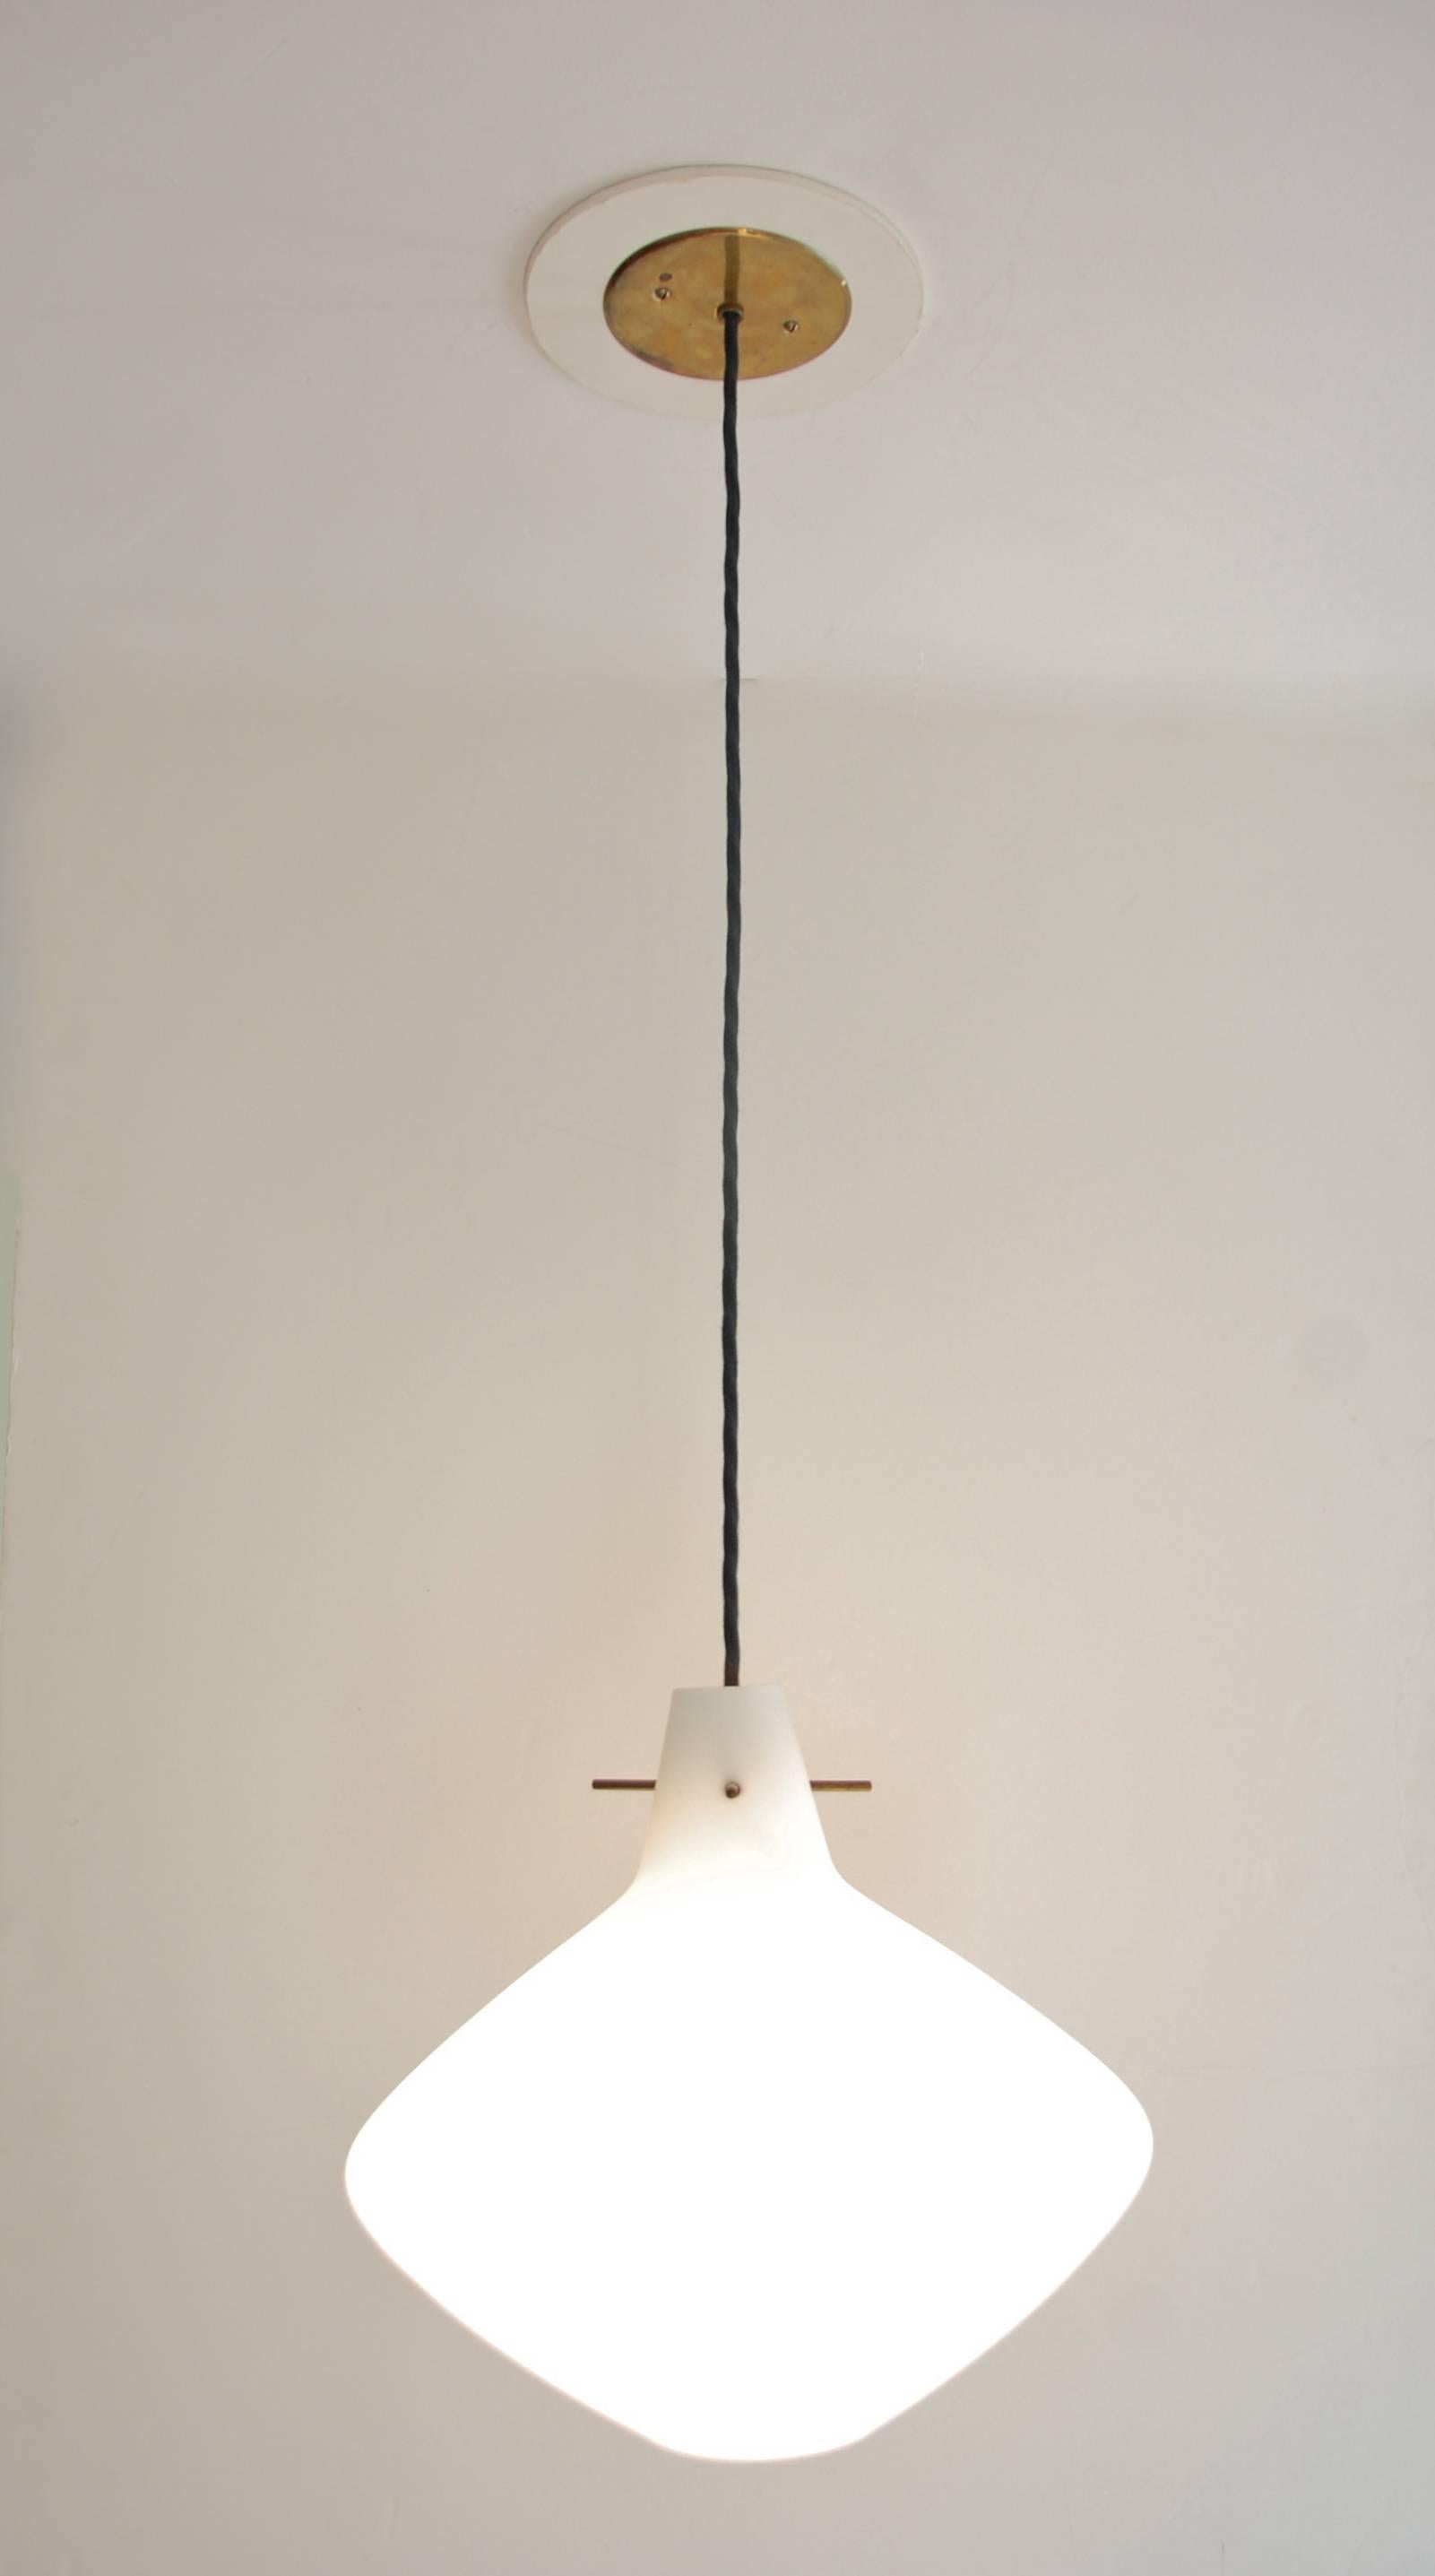 2 Stilnovo Glass Pendants In Excellent Condition For Sale In Los Angeles, CA